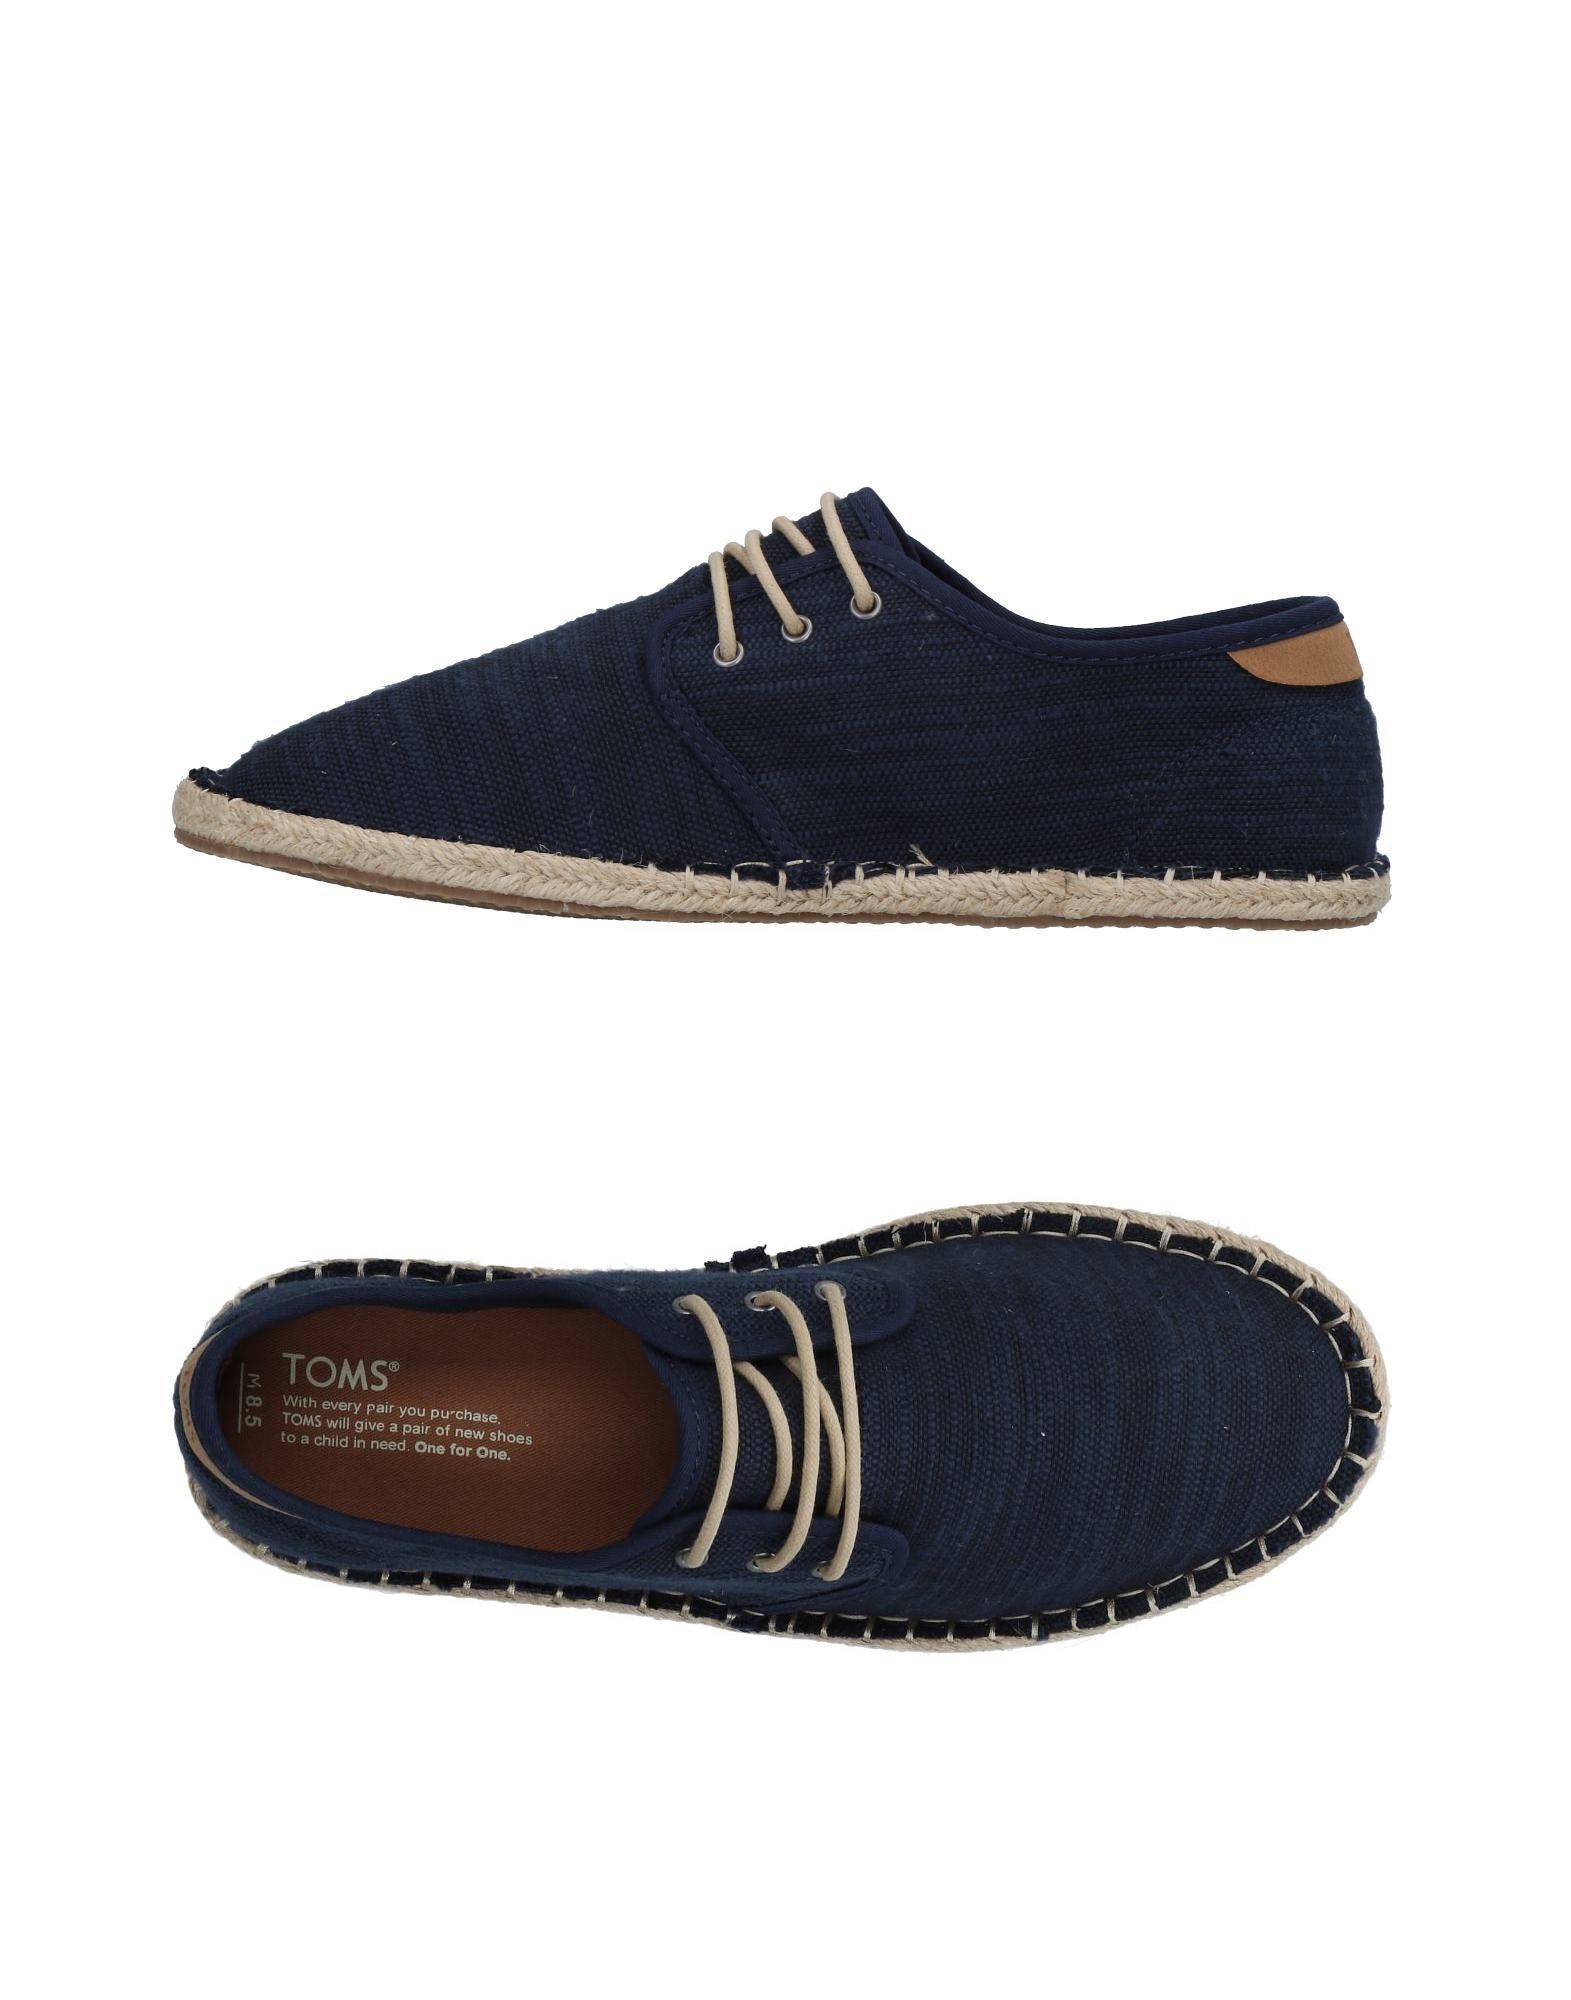 TOMS Trainers,11480092CP 11